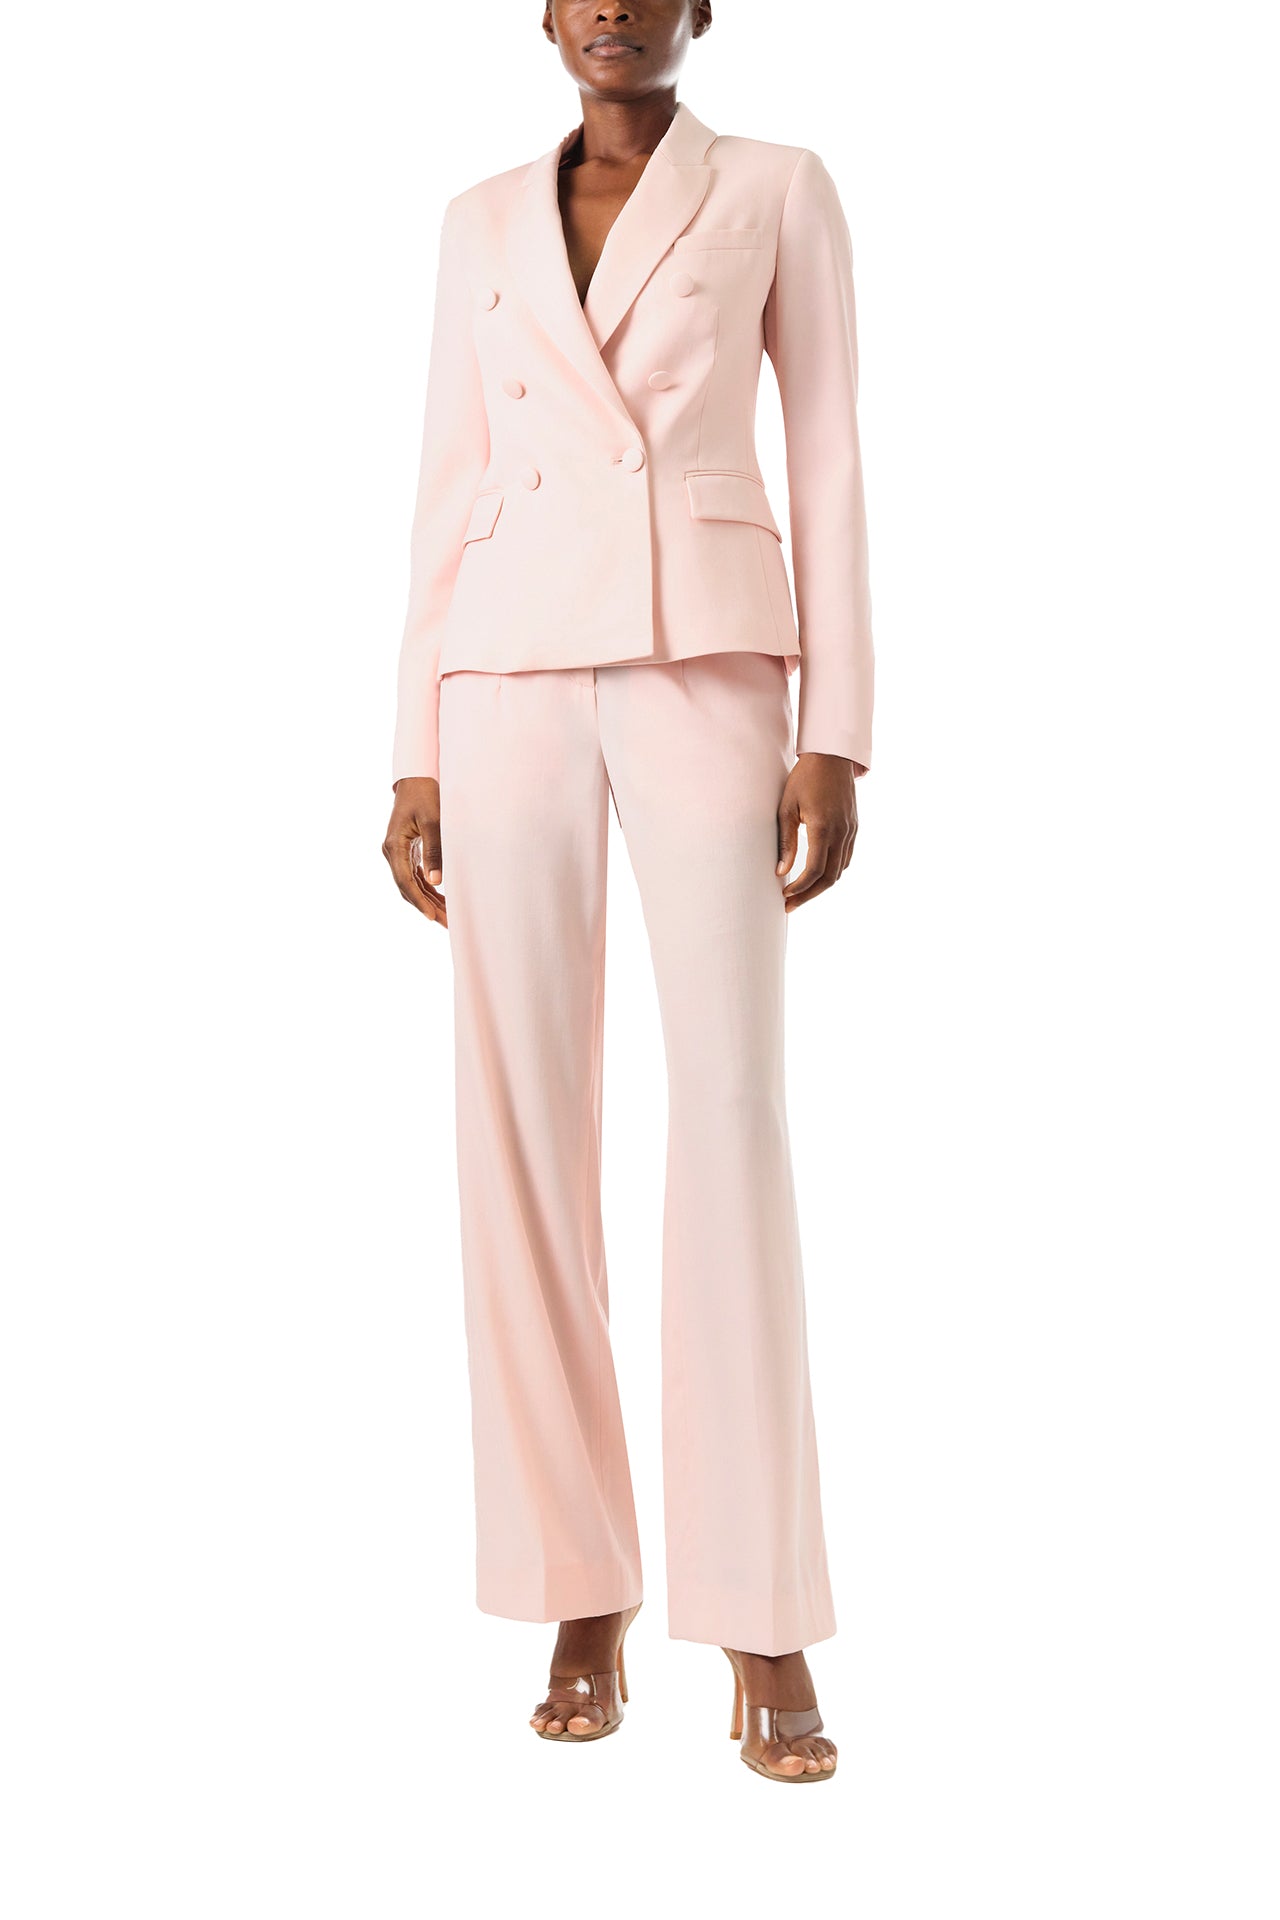 Monique Lhuillier Fall 2024 pale blush wool, double breasted wool blazer with full length sleeve - front.